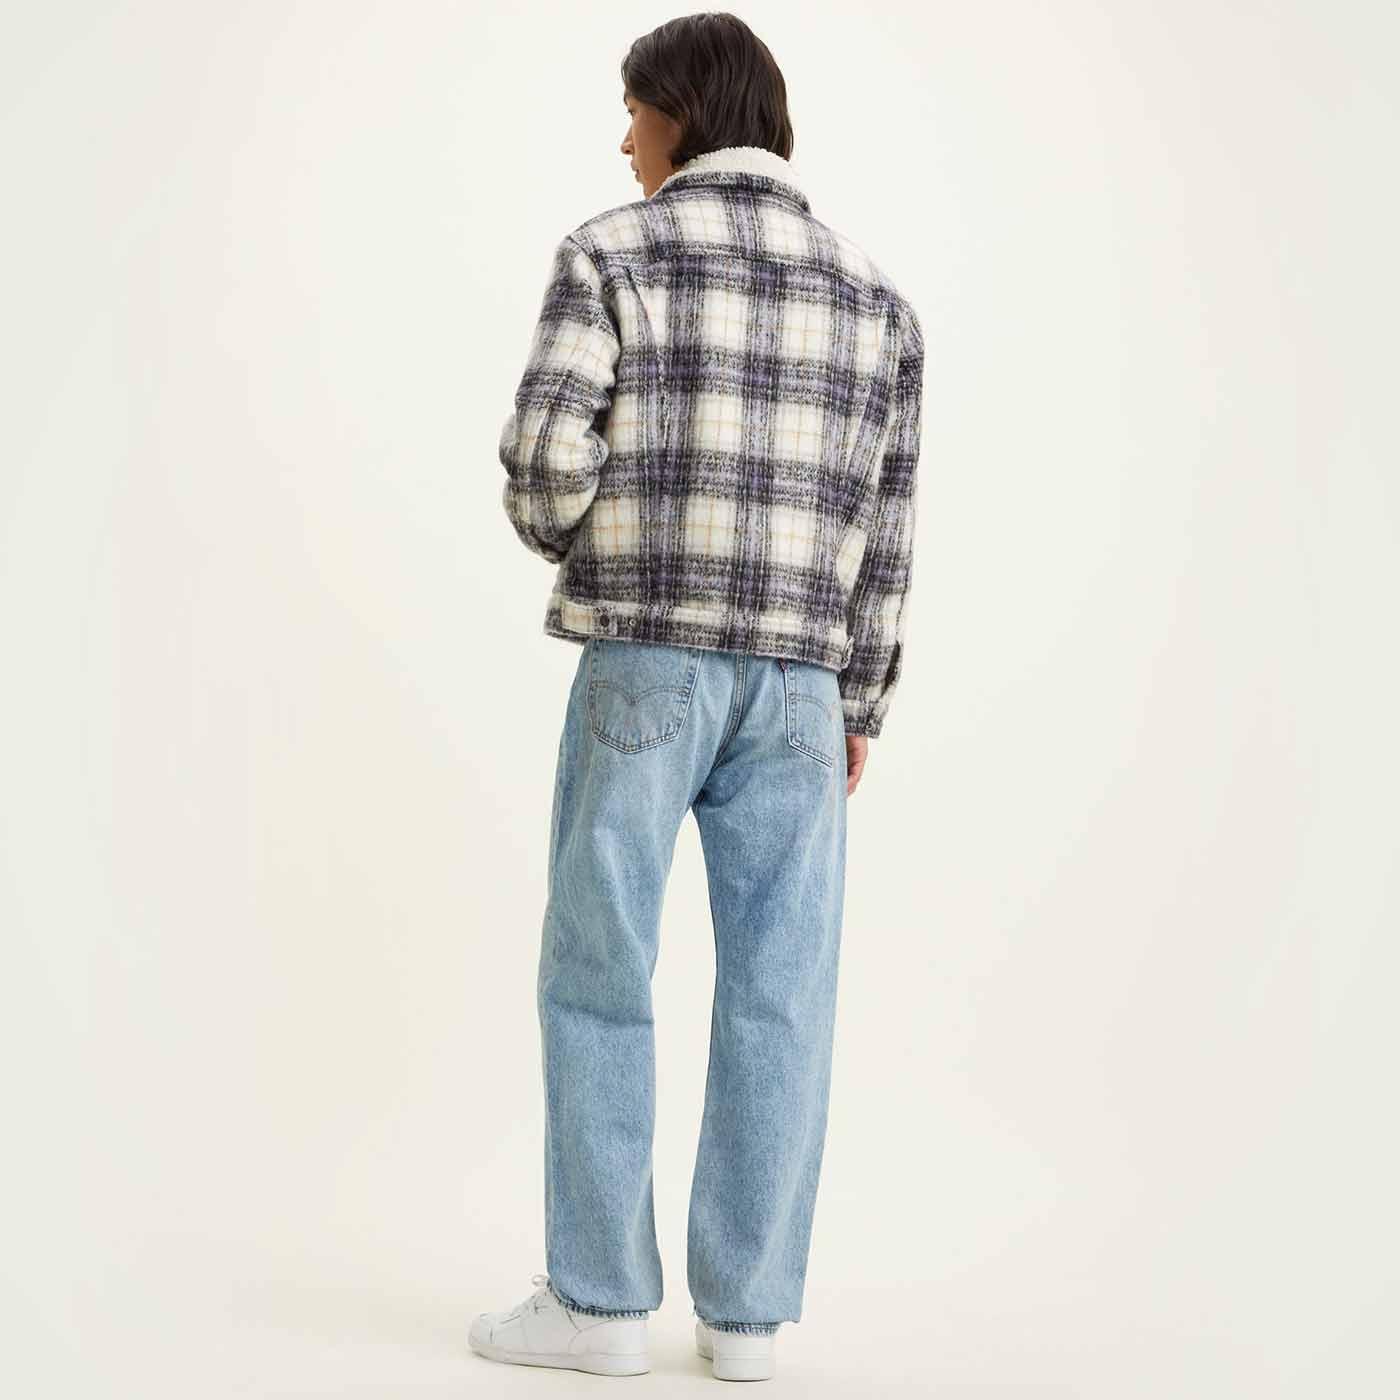 LEVI'S Vintage Fit 90s Check Sherpa Trucker Jacket in Nico Tofu